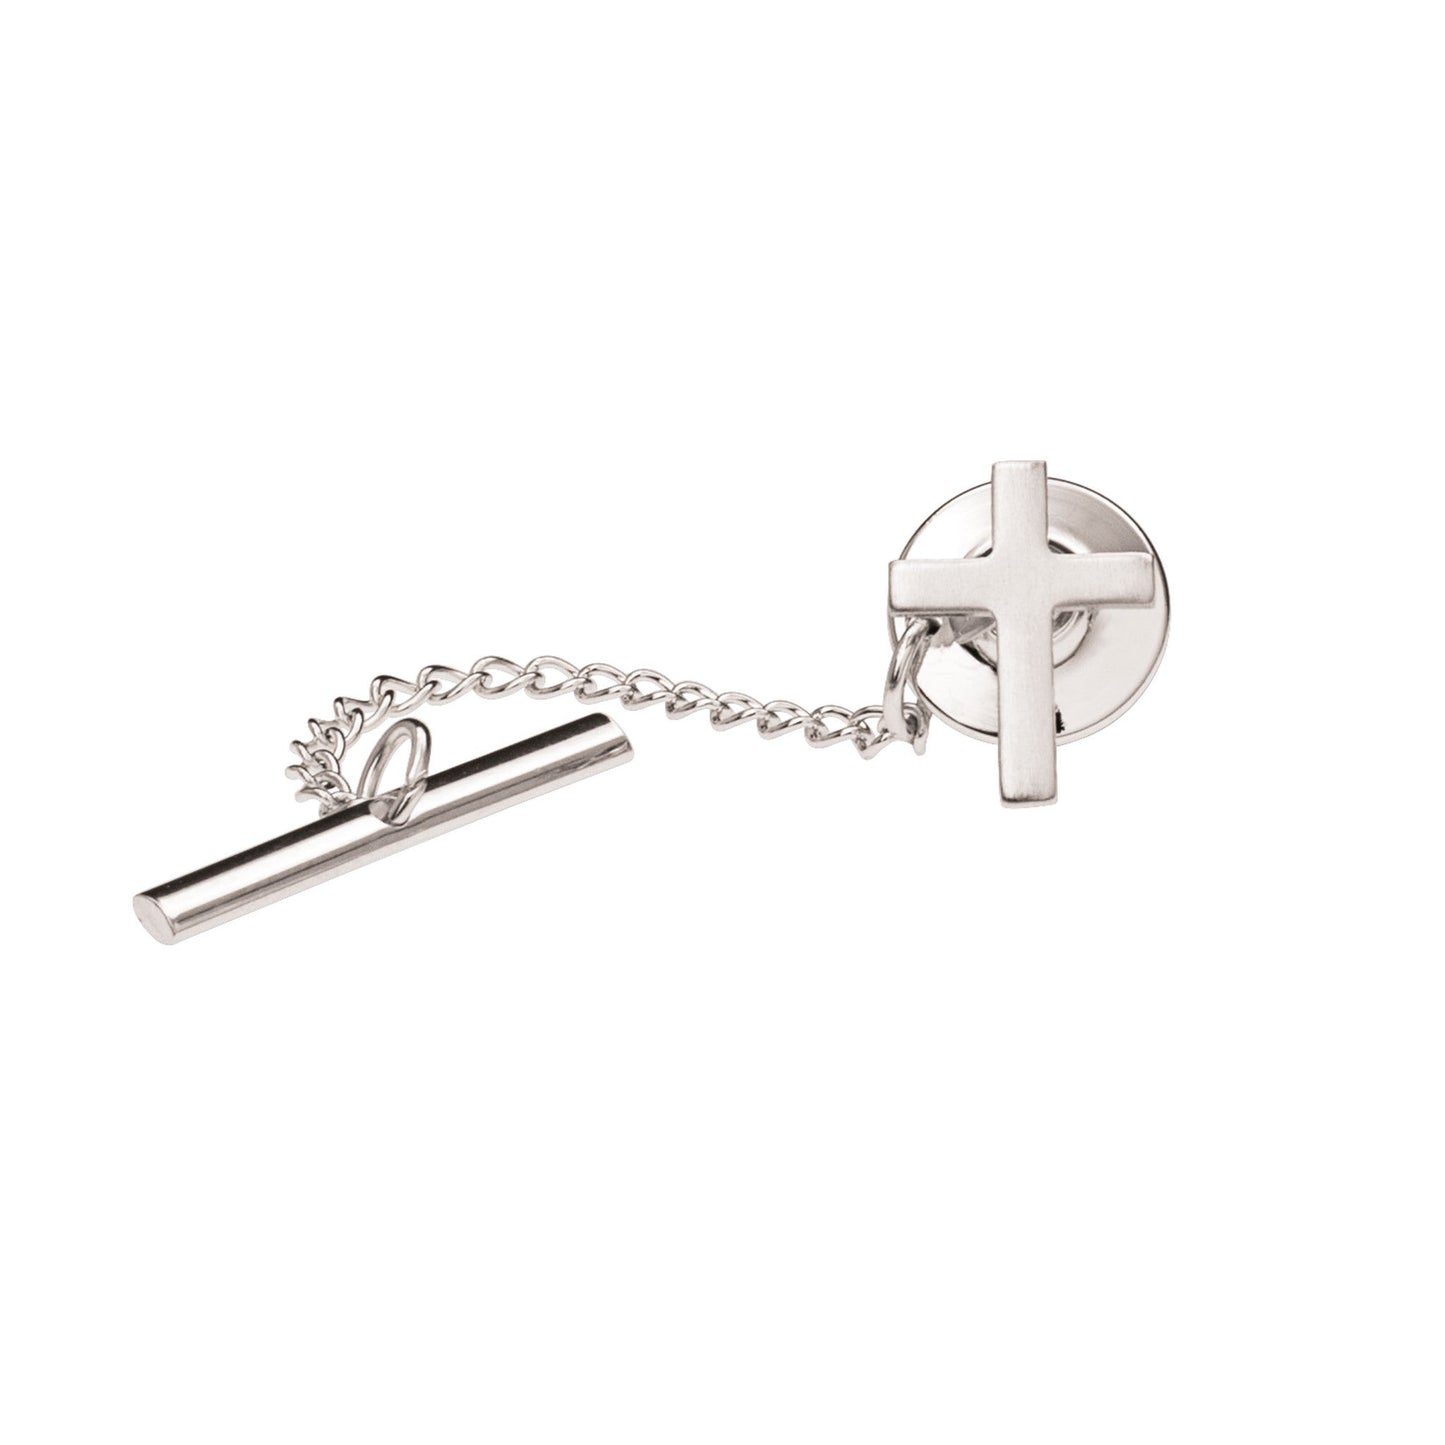 A plain cross tie tack displayed on a neutral white background.